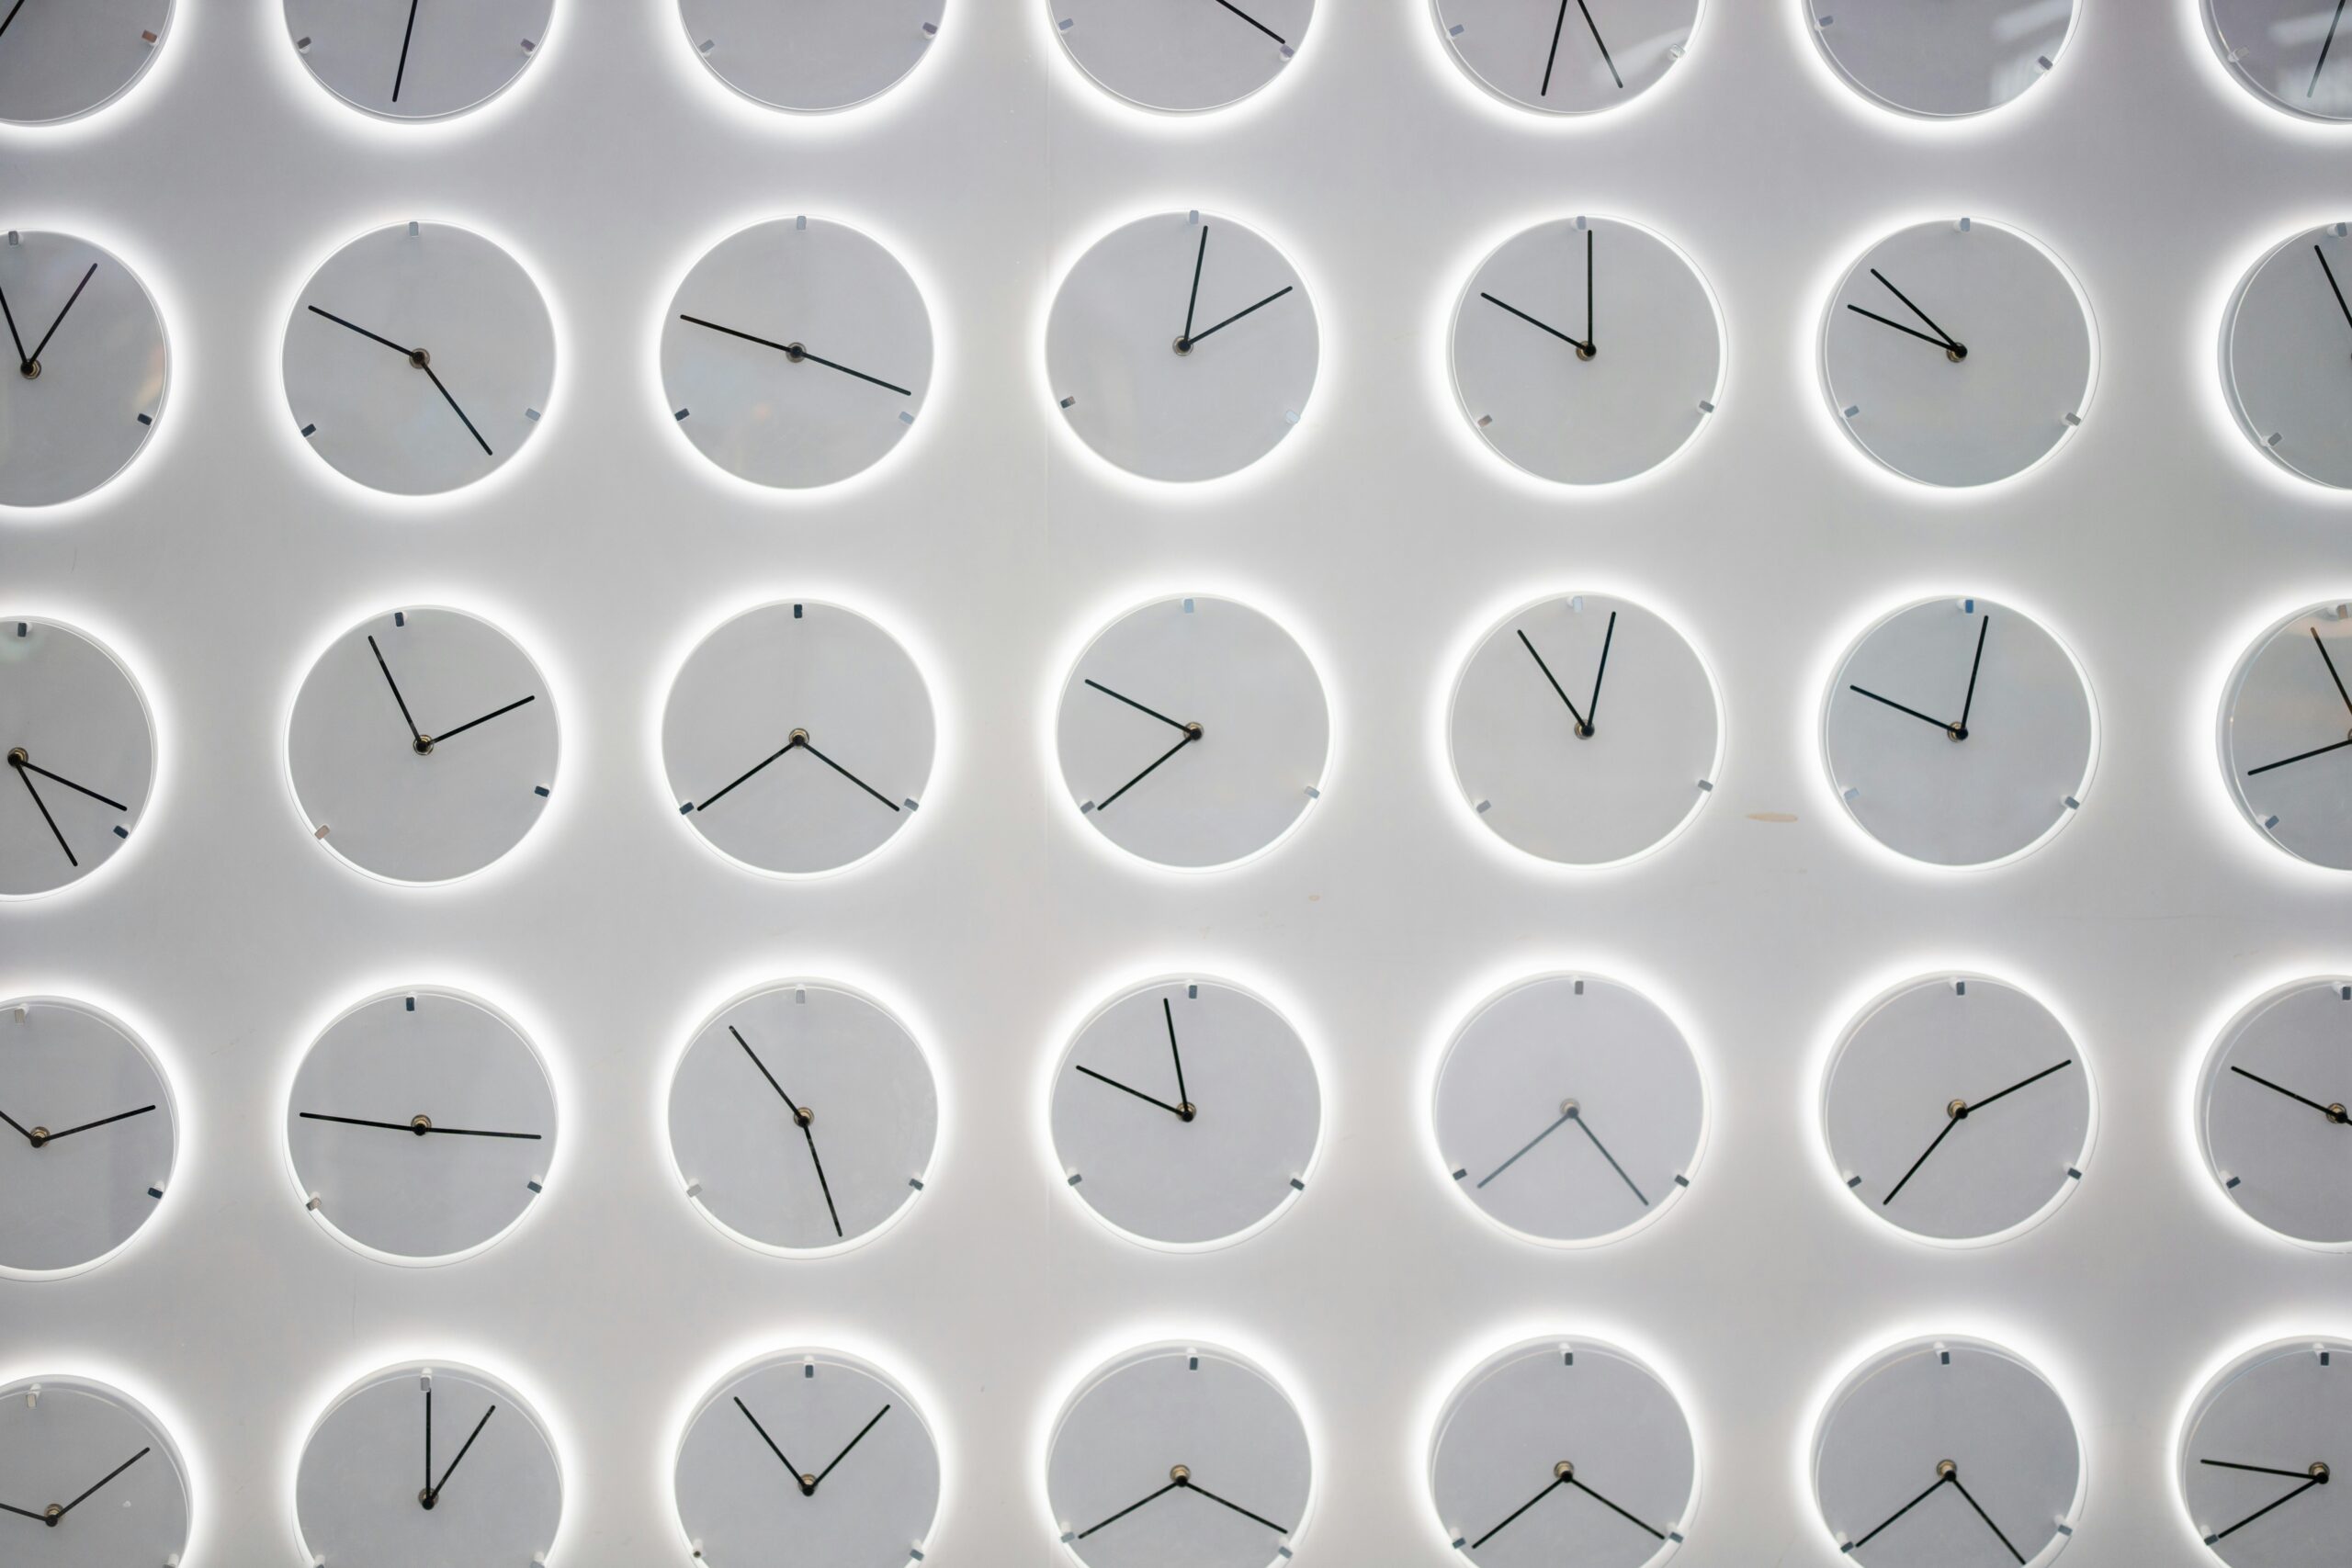 Clocks on a white wall showing different time zones